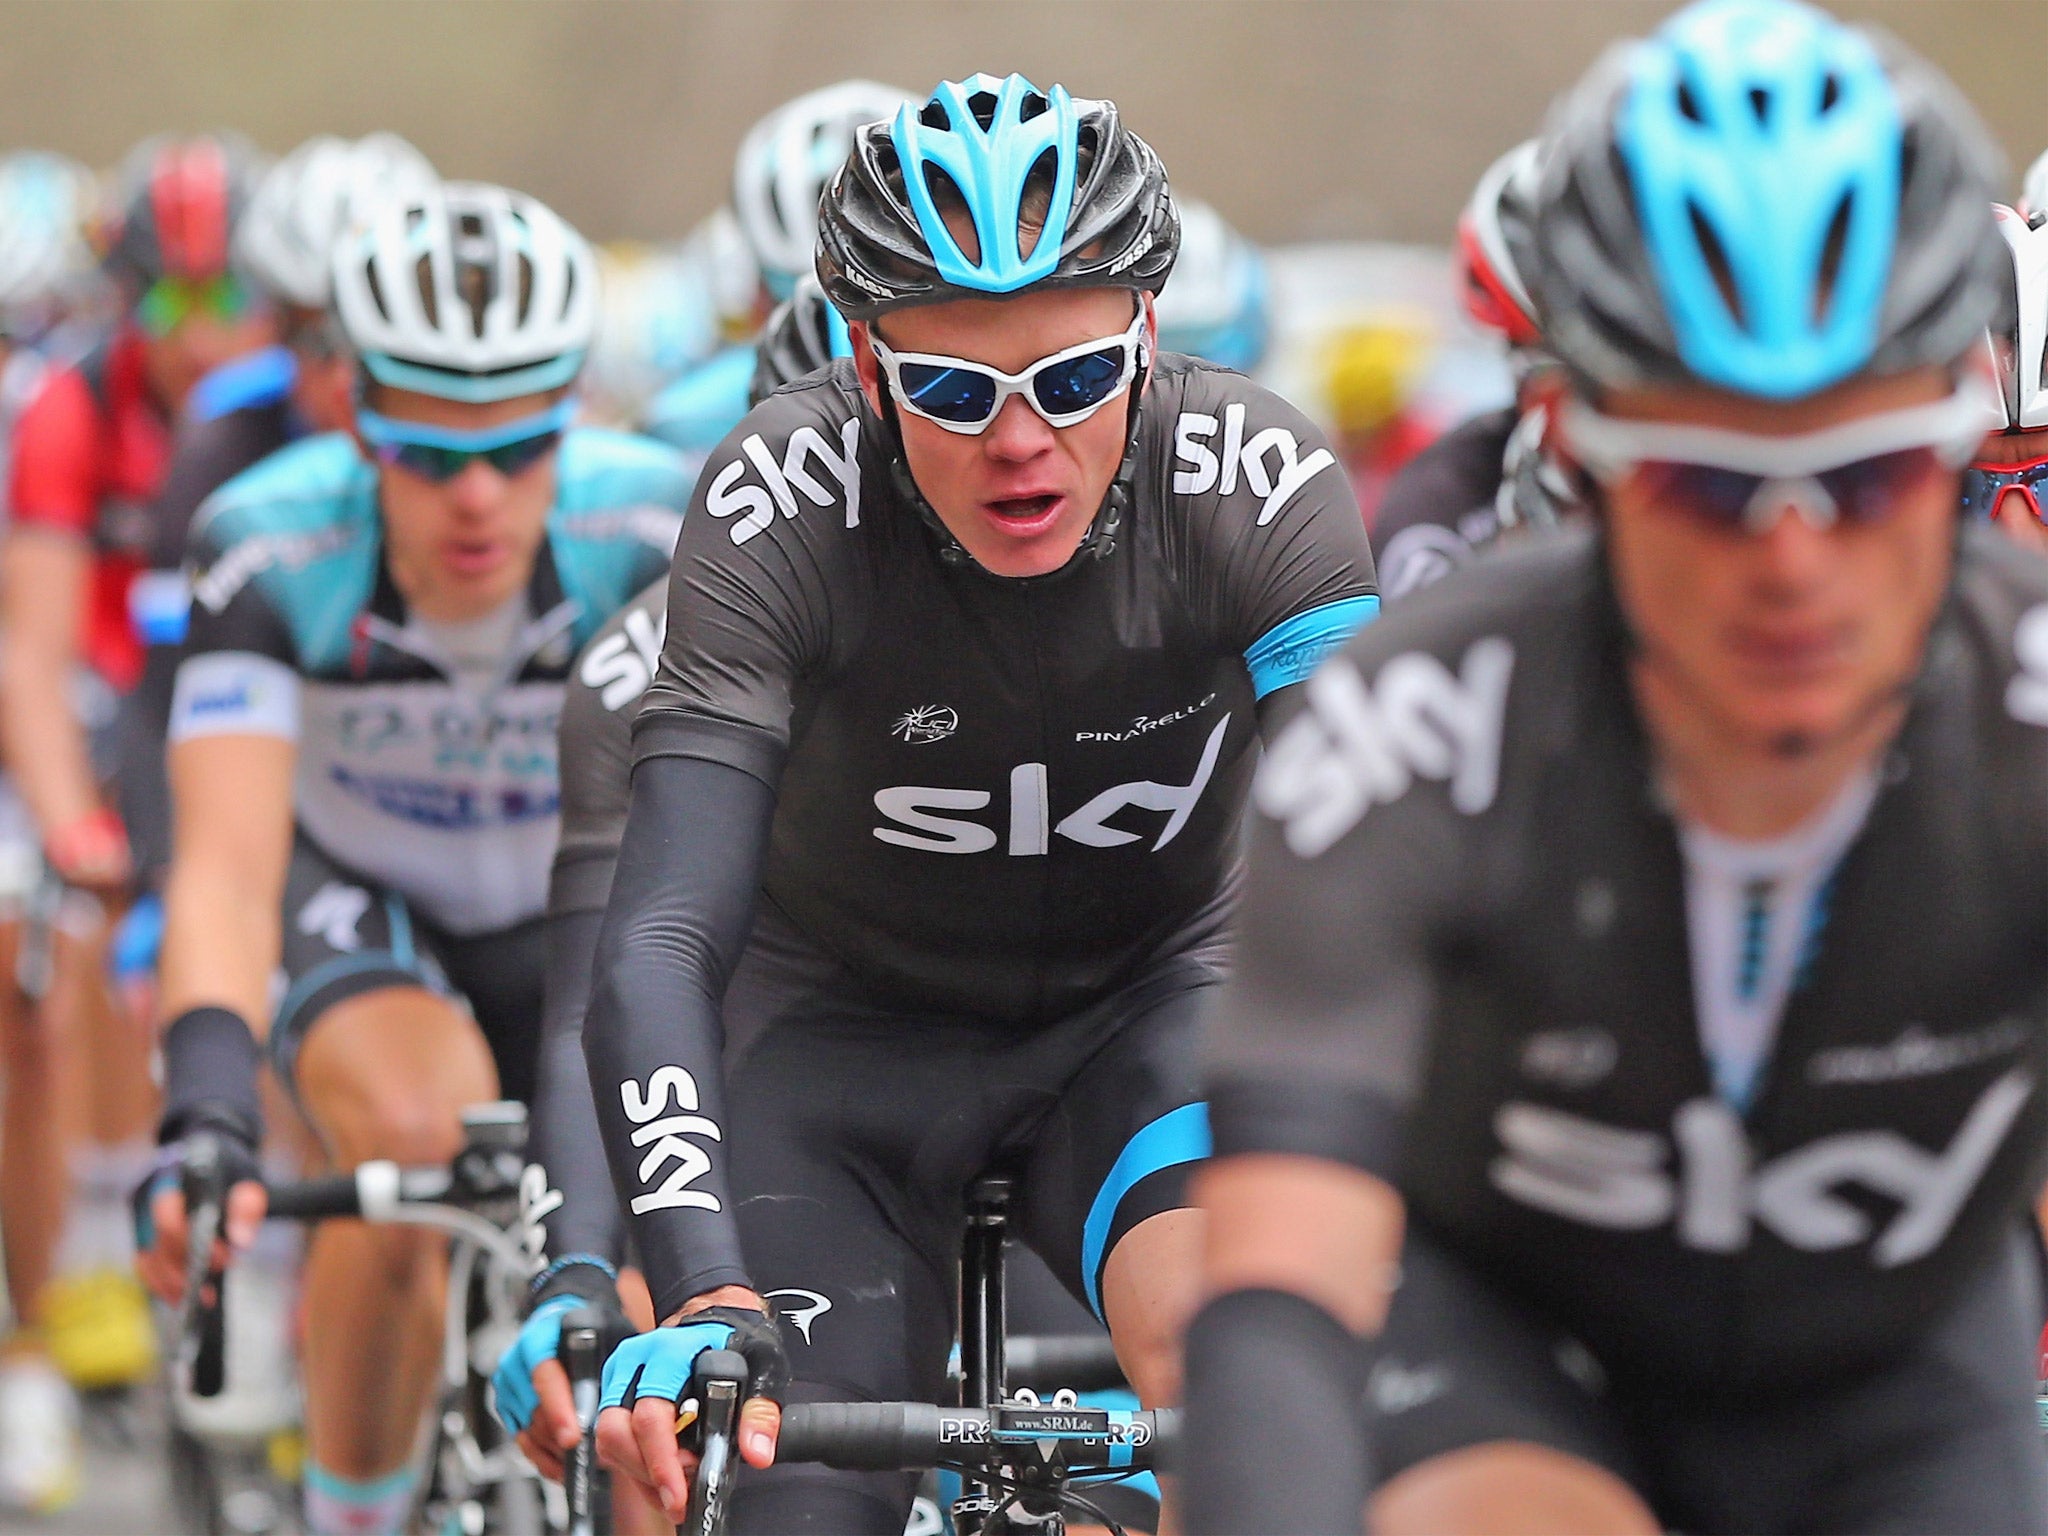 Chris Froome expects to be Team Sky's lead rider at the Tour de France